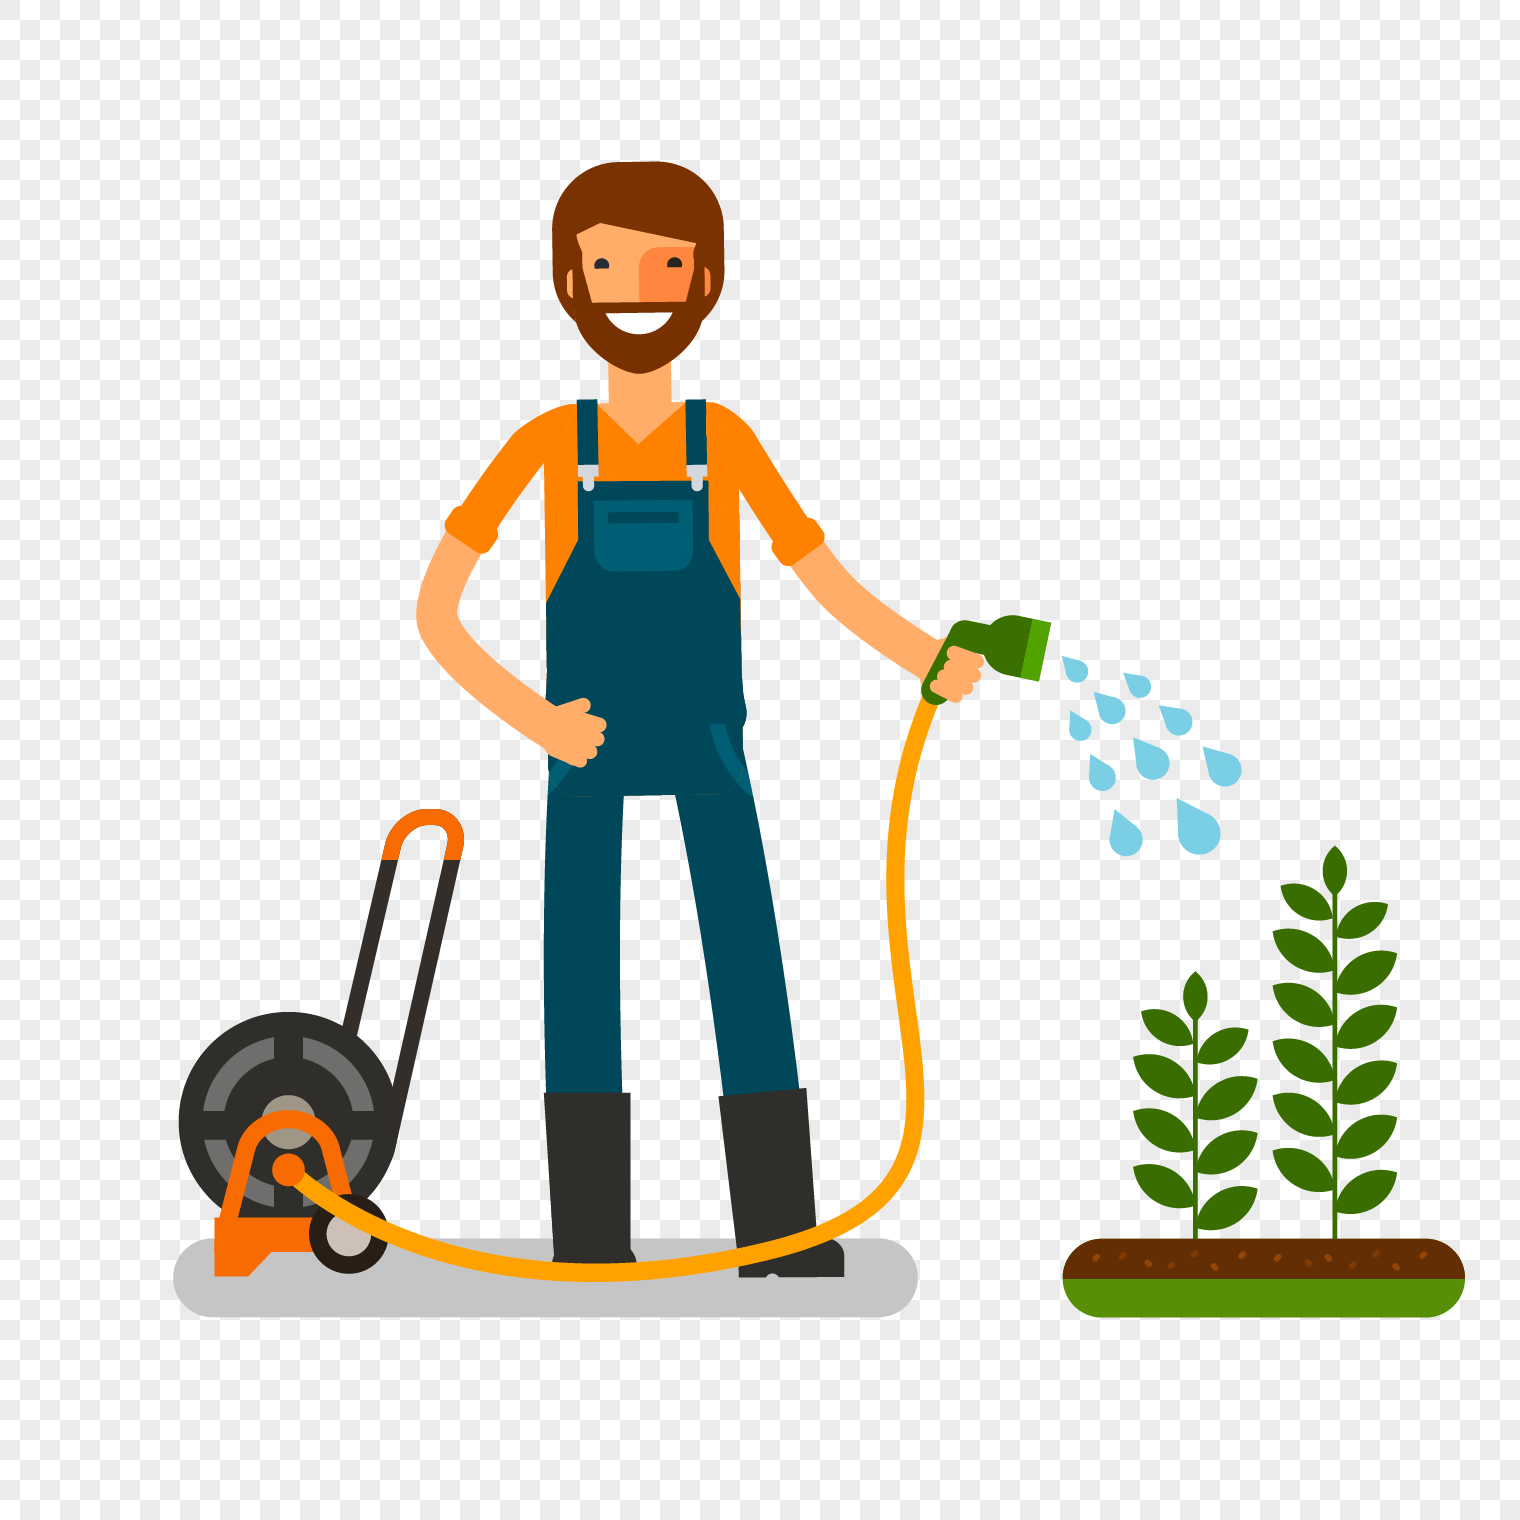 Irrigation Of Plants PNG Images With Transparent Background | Free ...